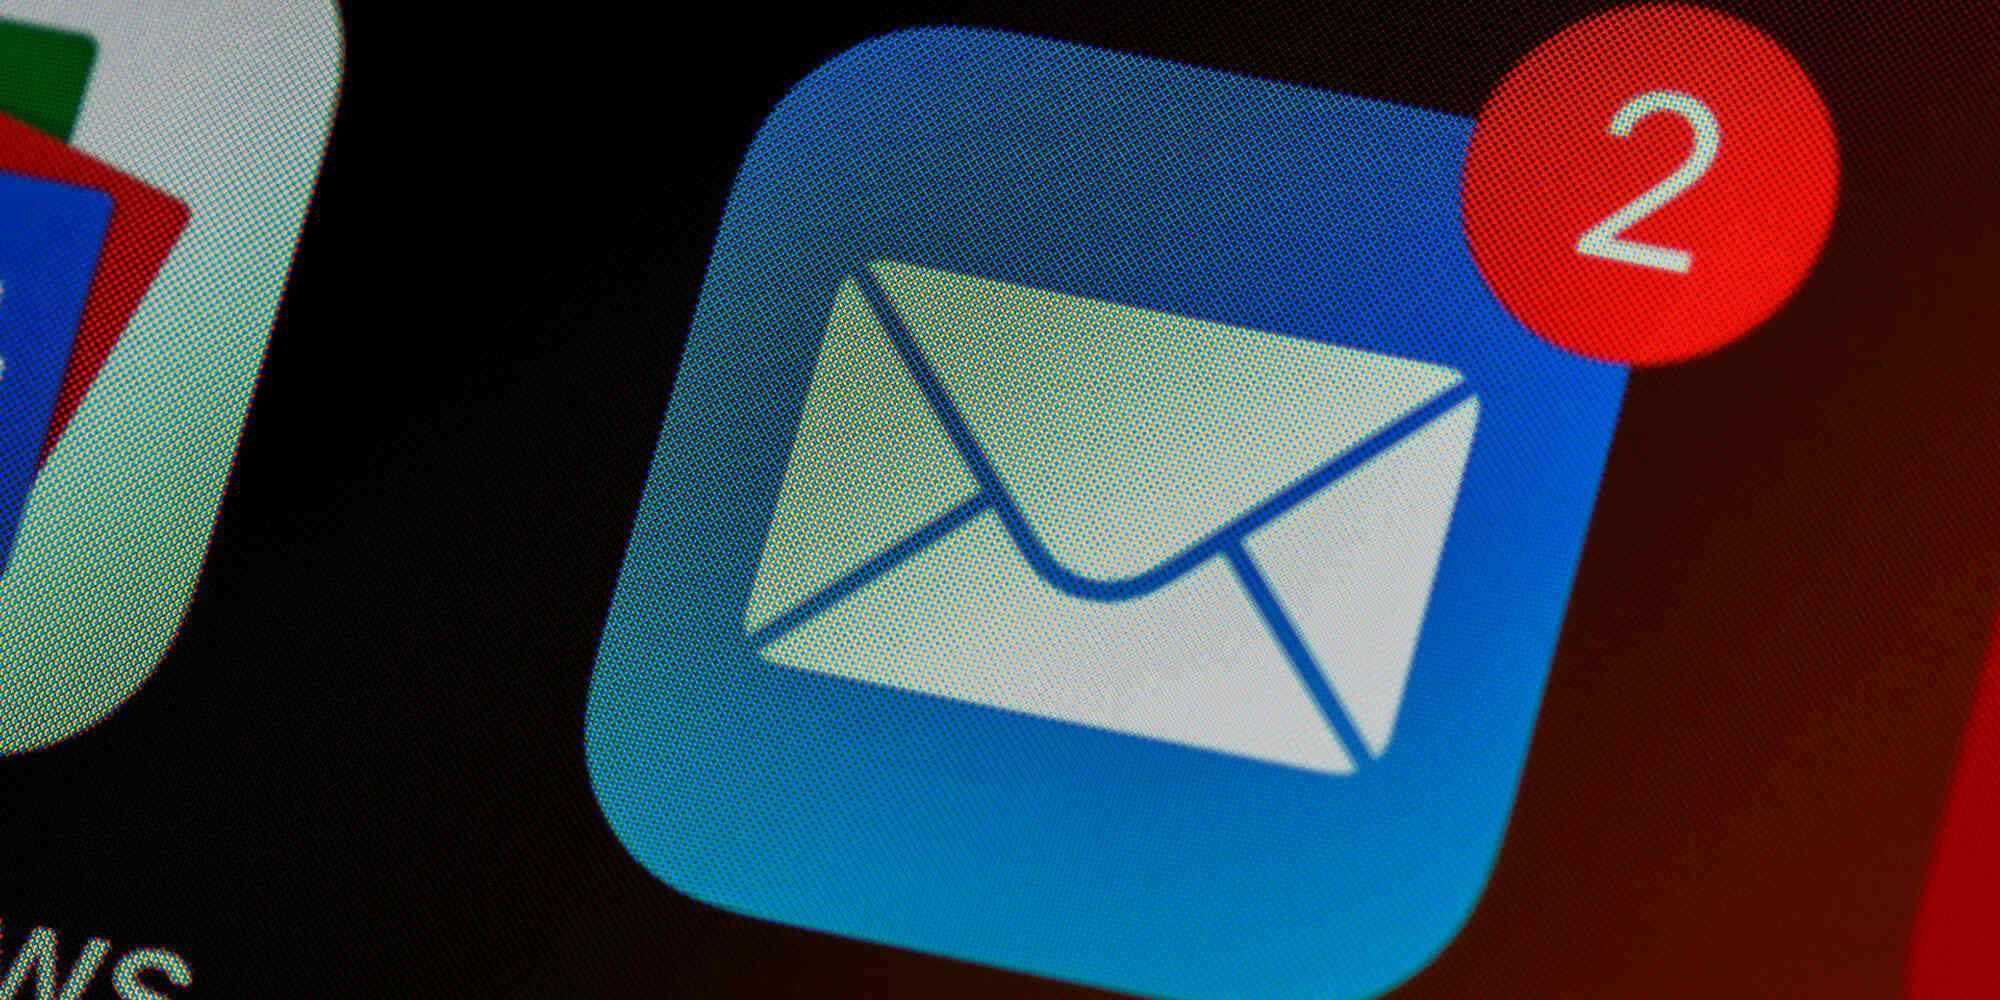 How To Download Emails From Server On IPhone